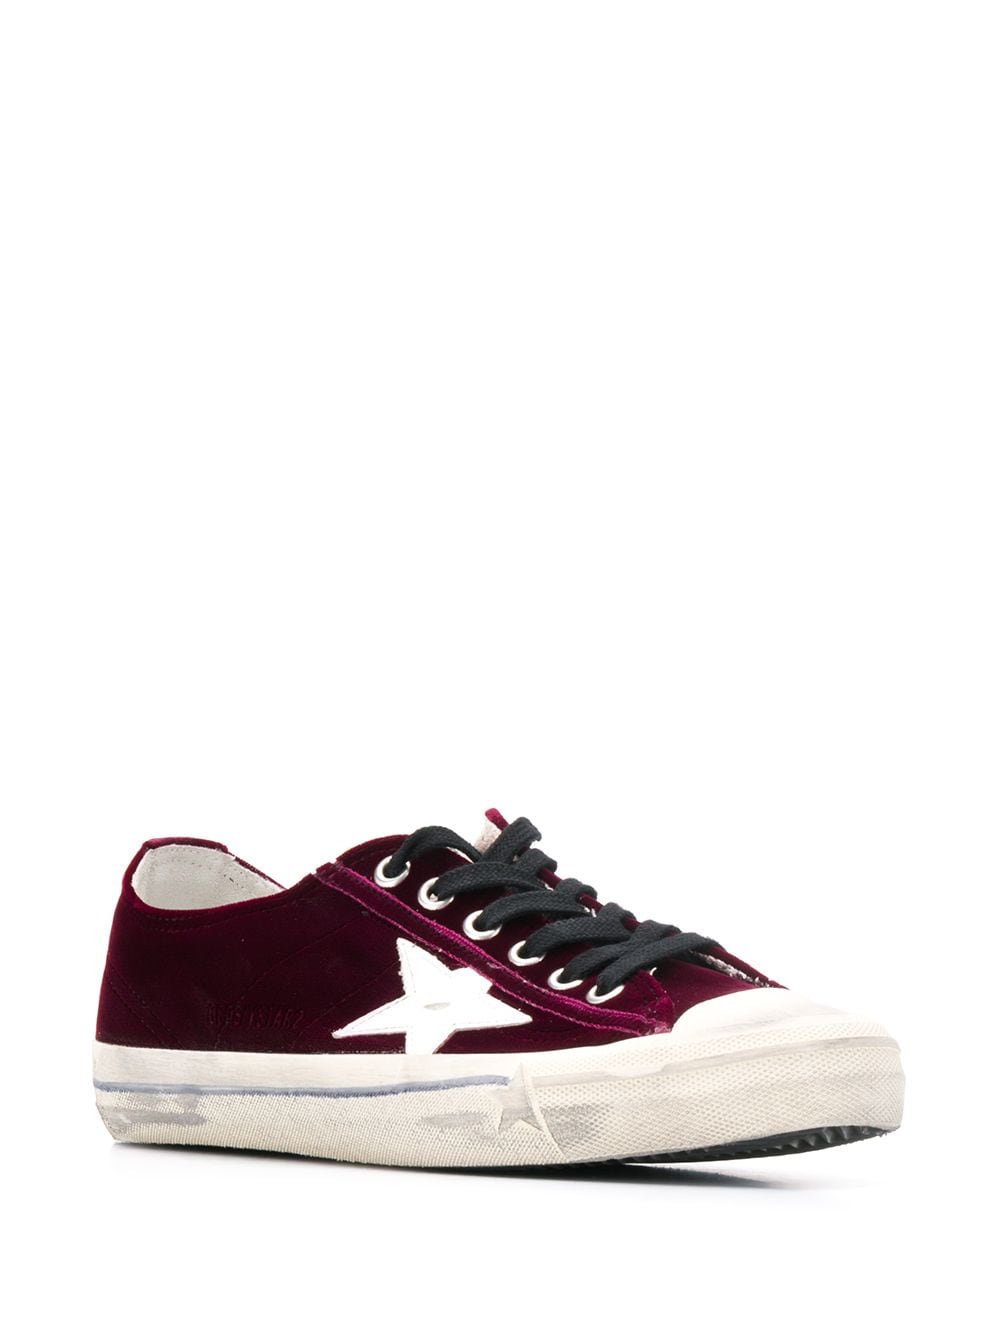 Shop Golden Goose V-Star velvet sneakers with Express Delivery - FARFETCH